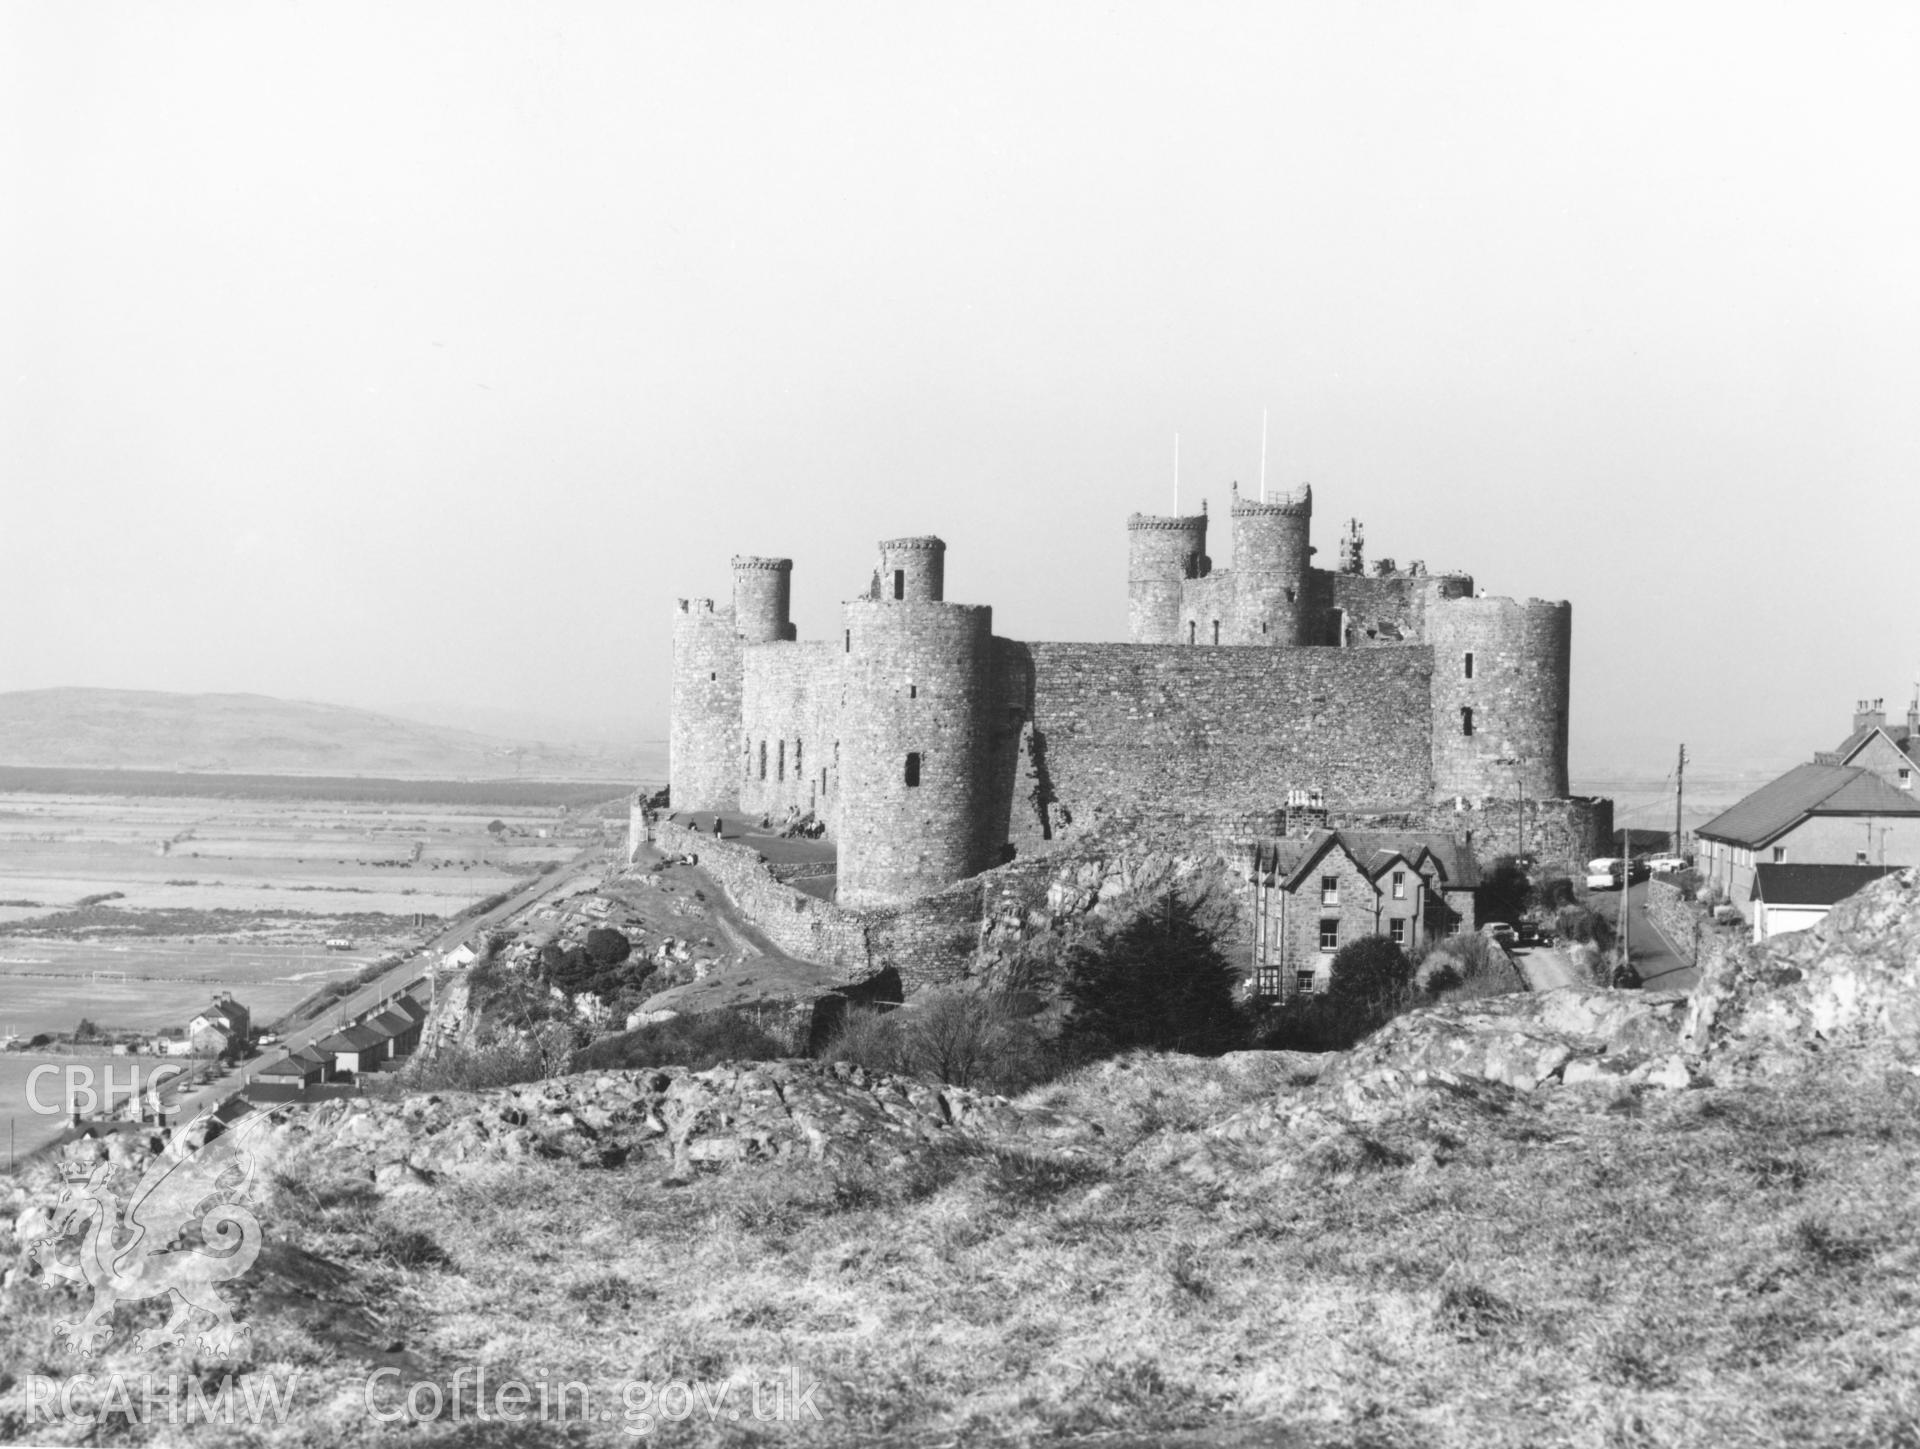 1 b/w print showing view of Harlech castle, collated by the former Central Office of Information.